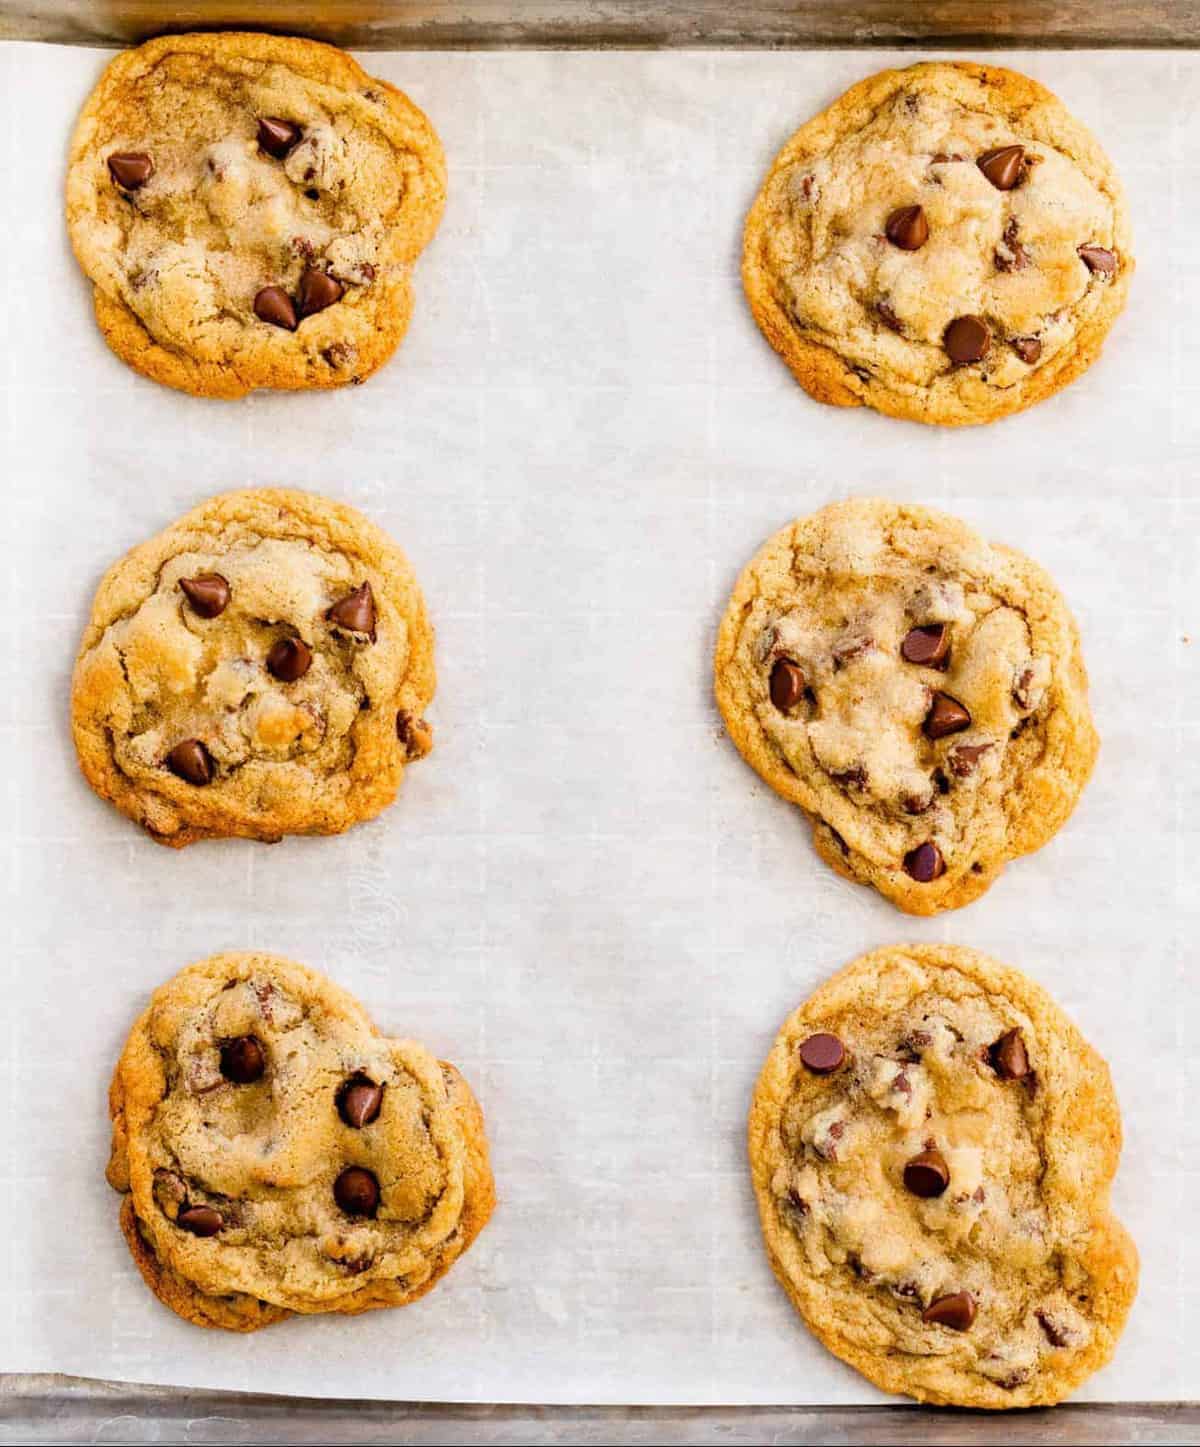 Perfectly baked chocolate chip cookies sit on a baking sheet.